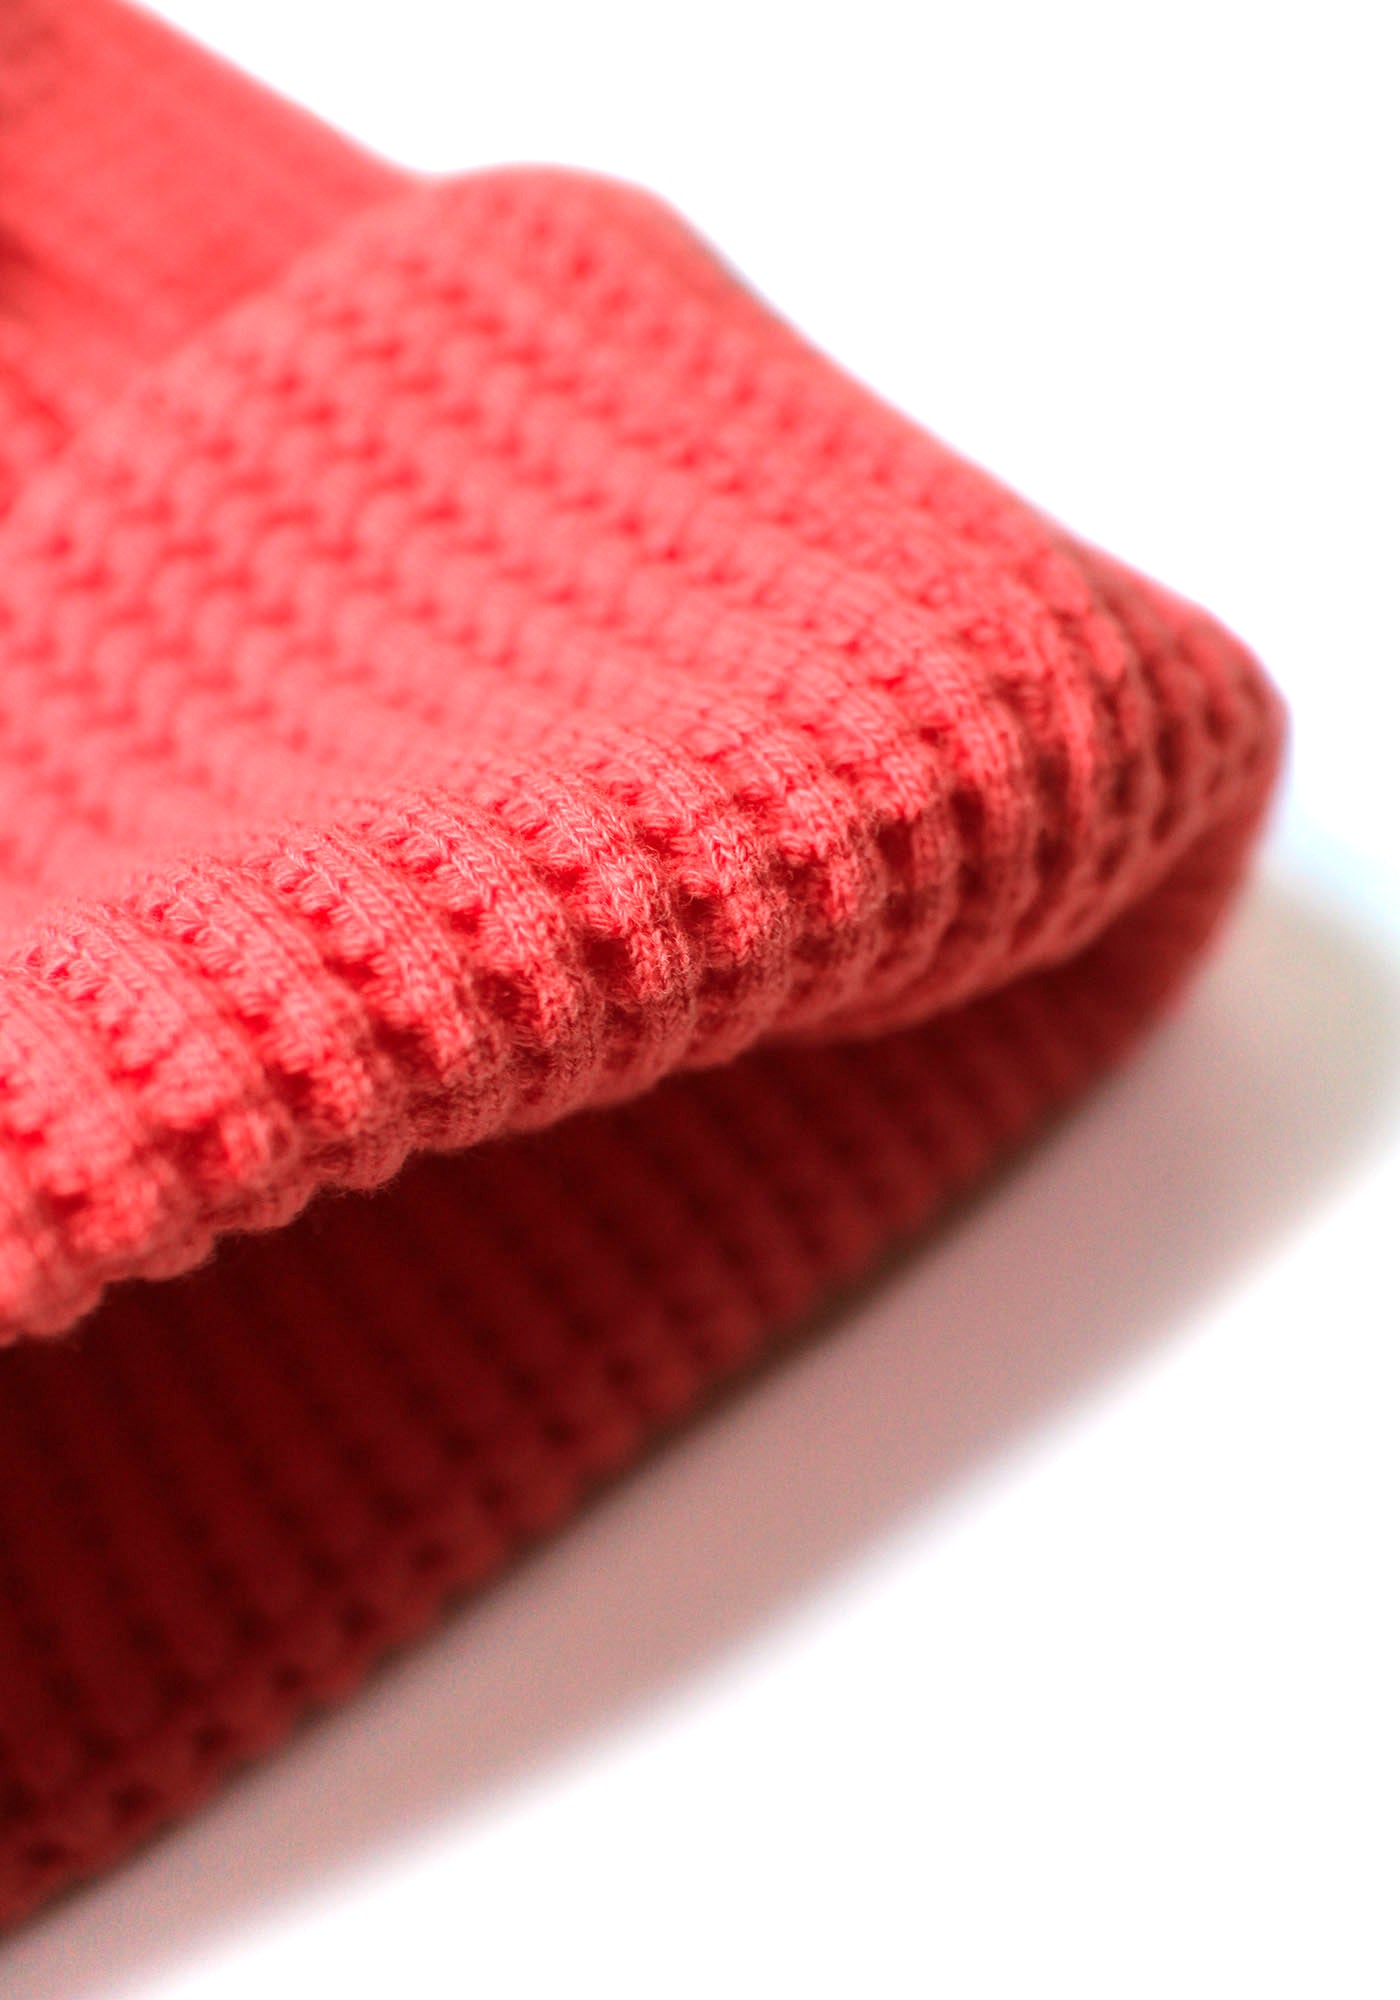 WAFFLE KNIT CAP - CLASSIC RED